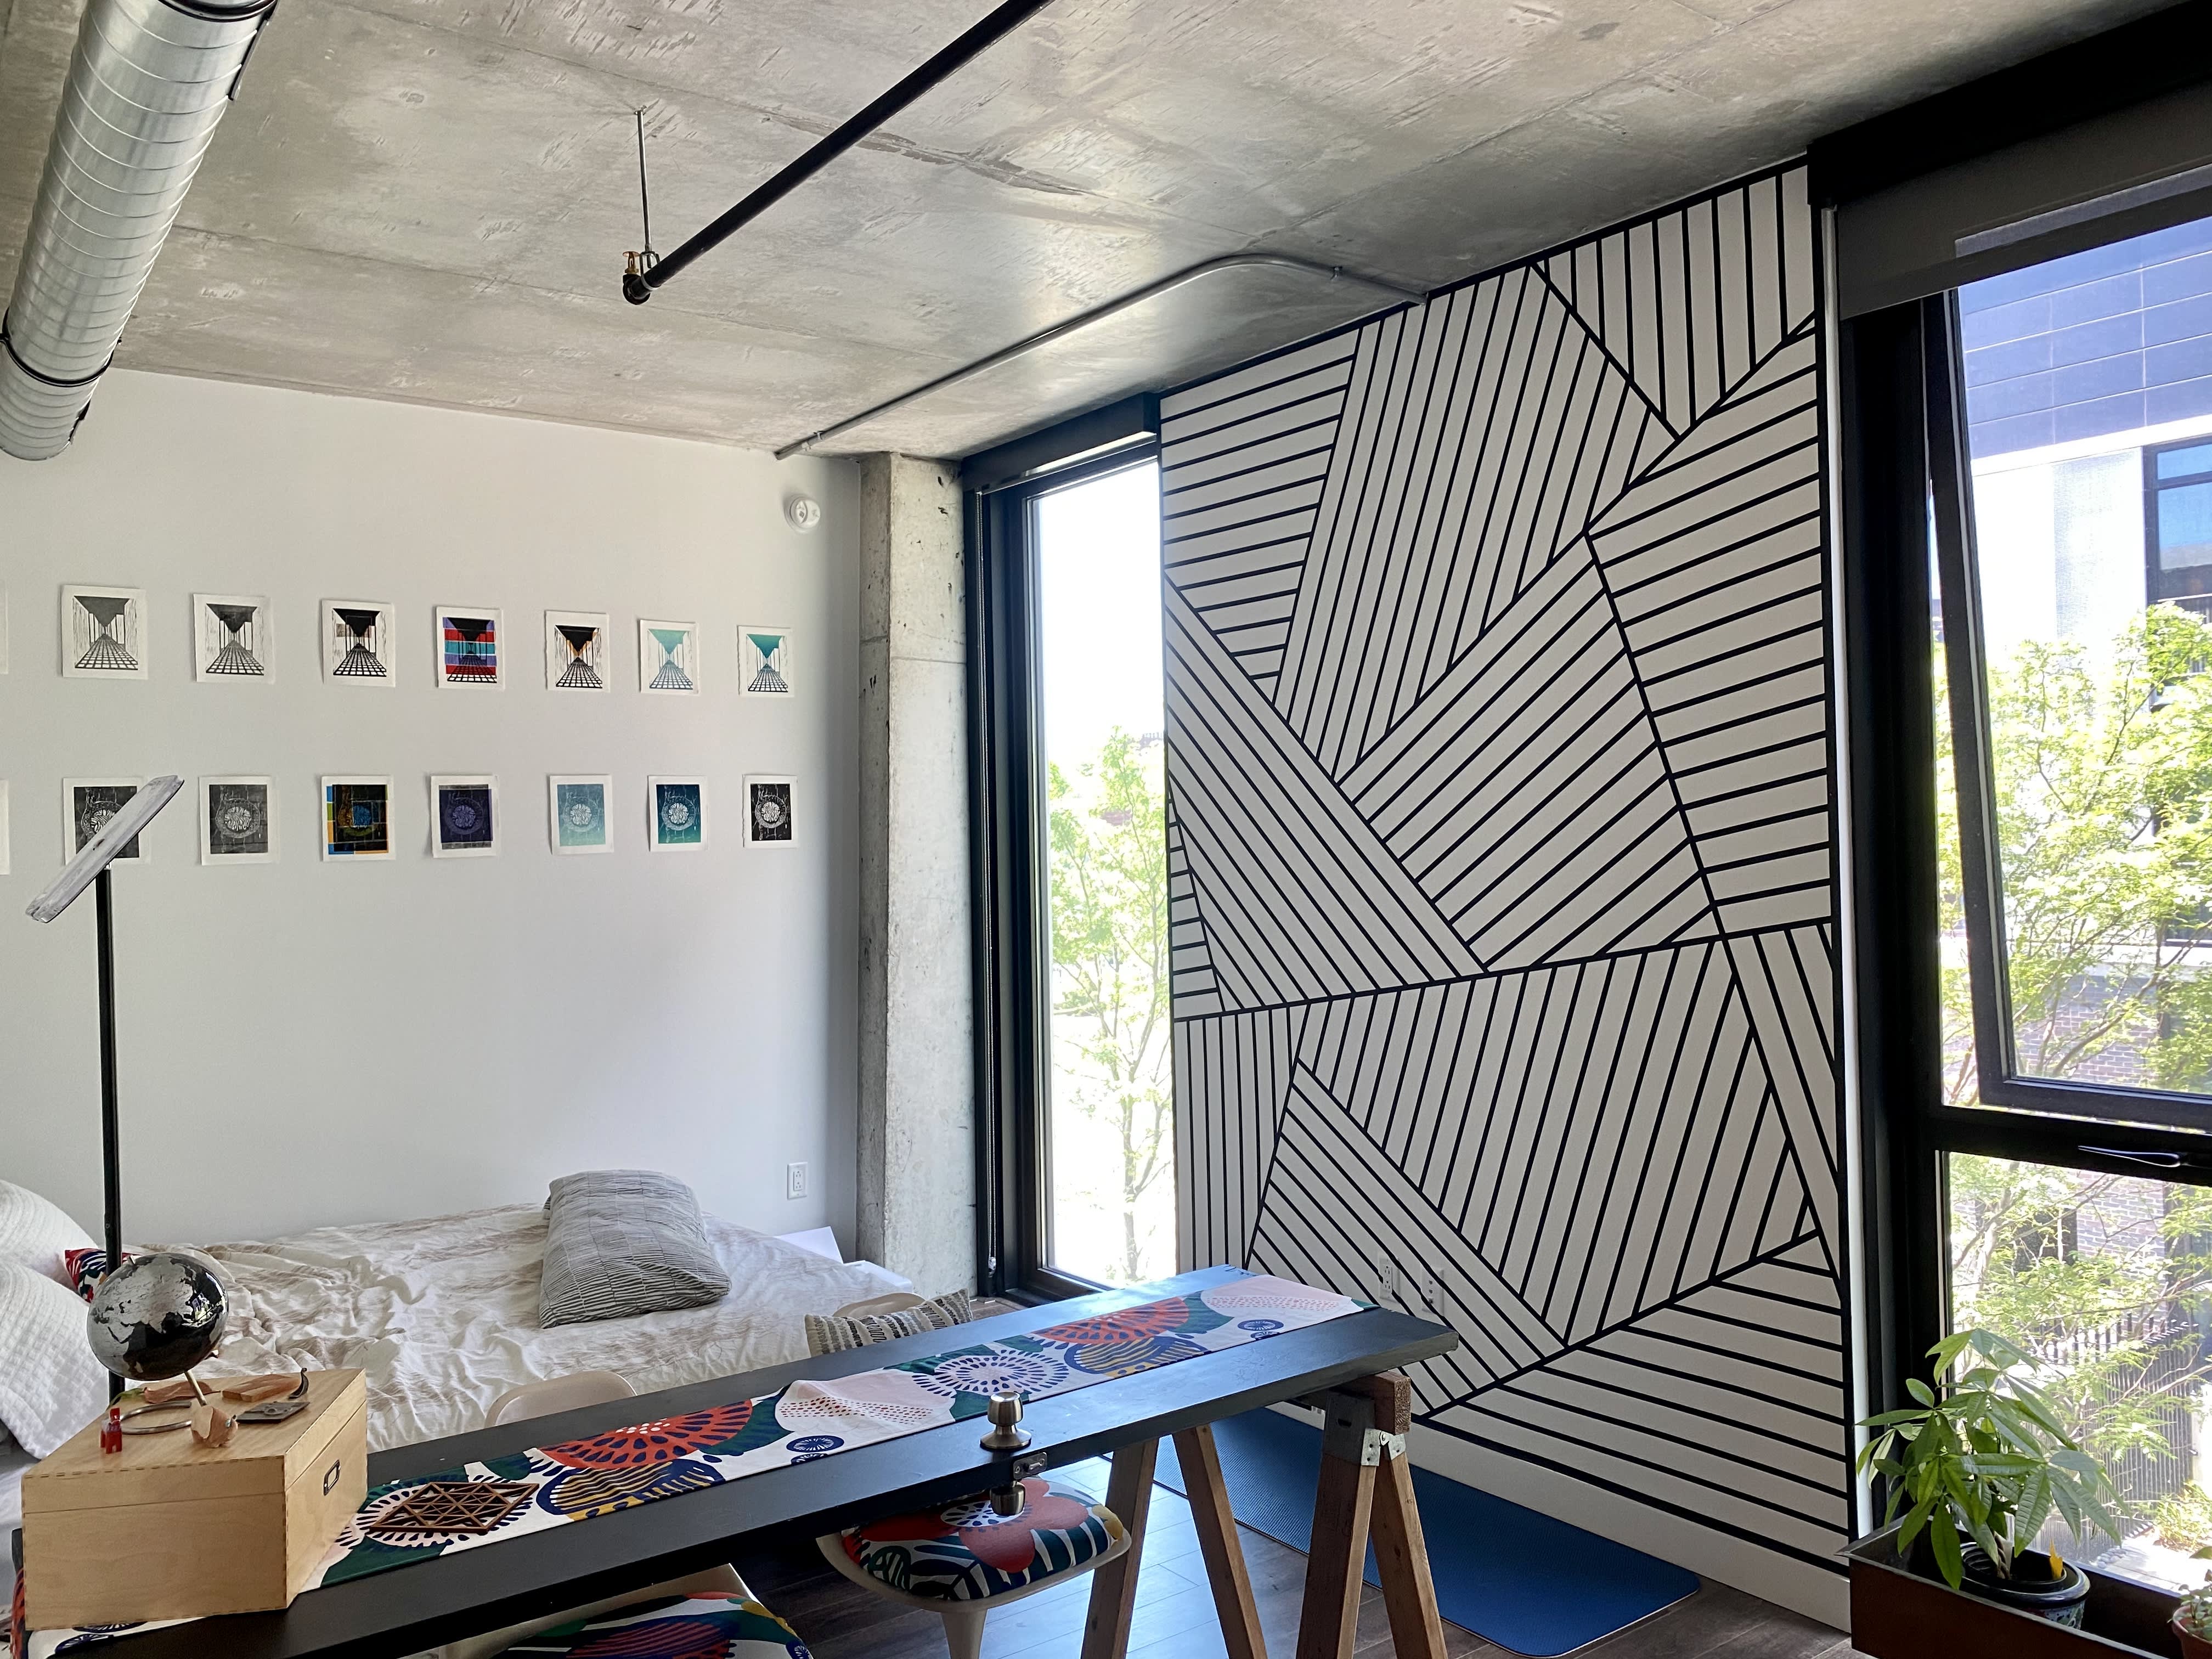 How to use tape to decorate your walls — Hausmatter